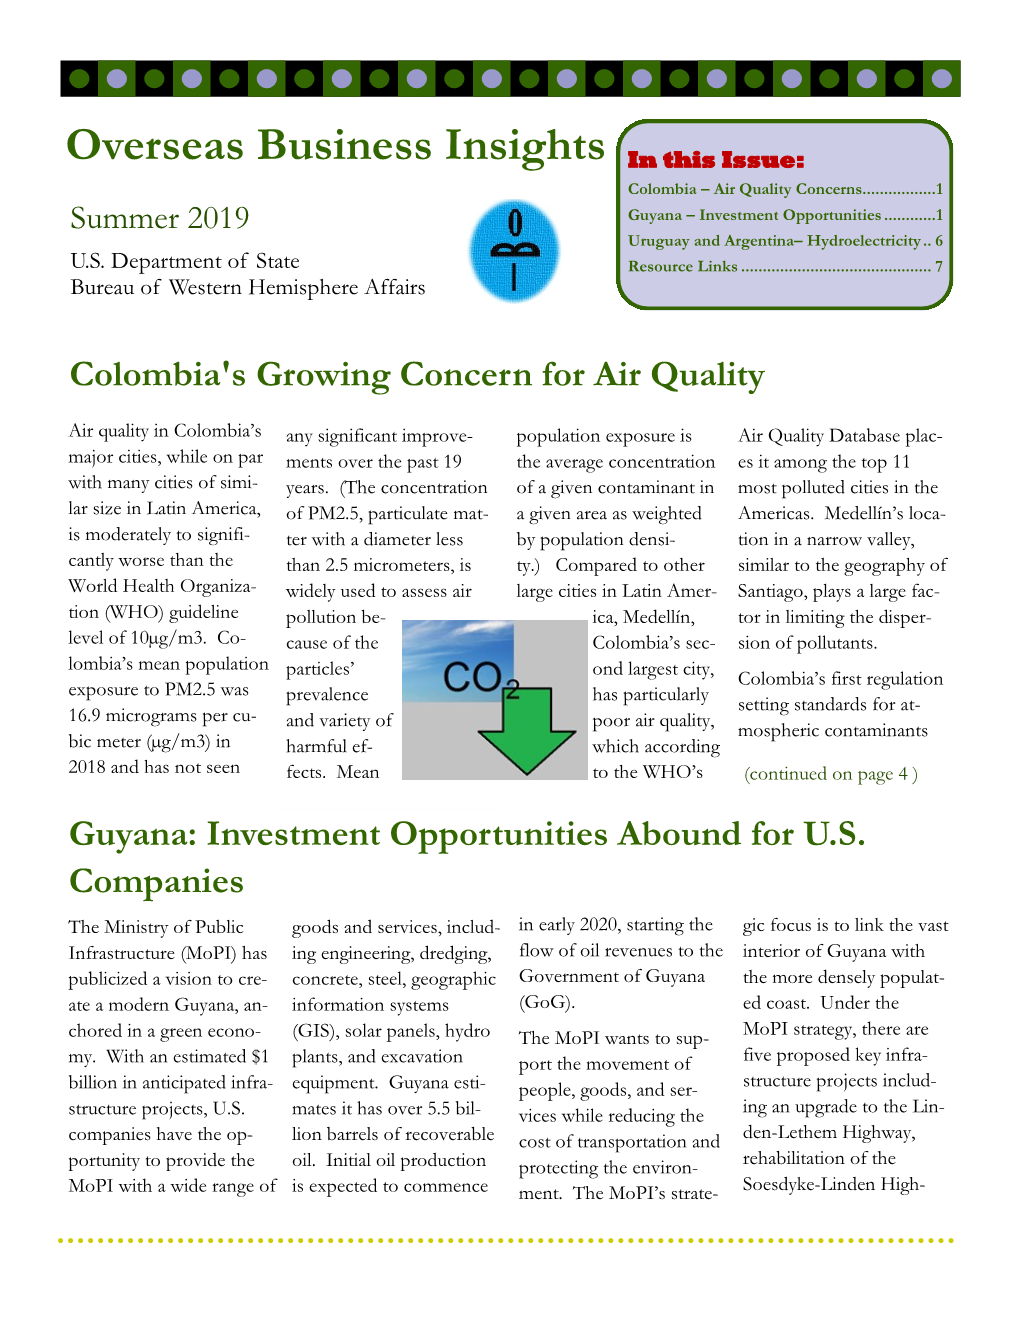 Overseas Business Insights in This Issue: Colombia – Air Quality Concerns